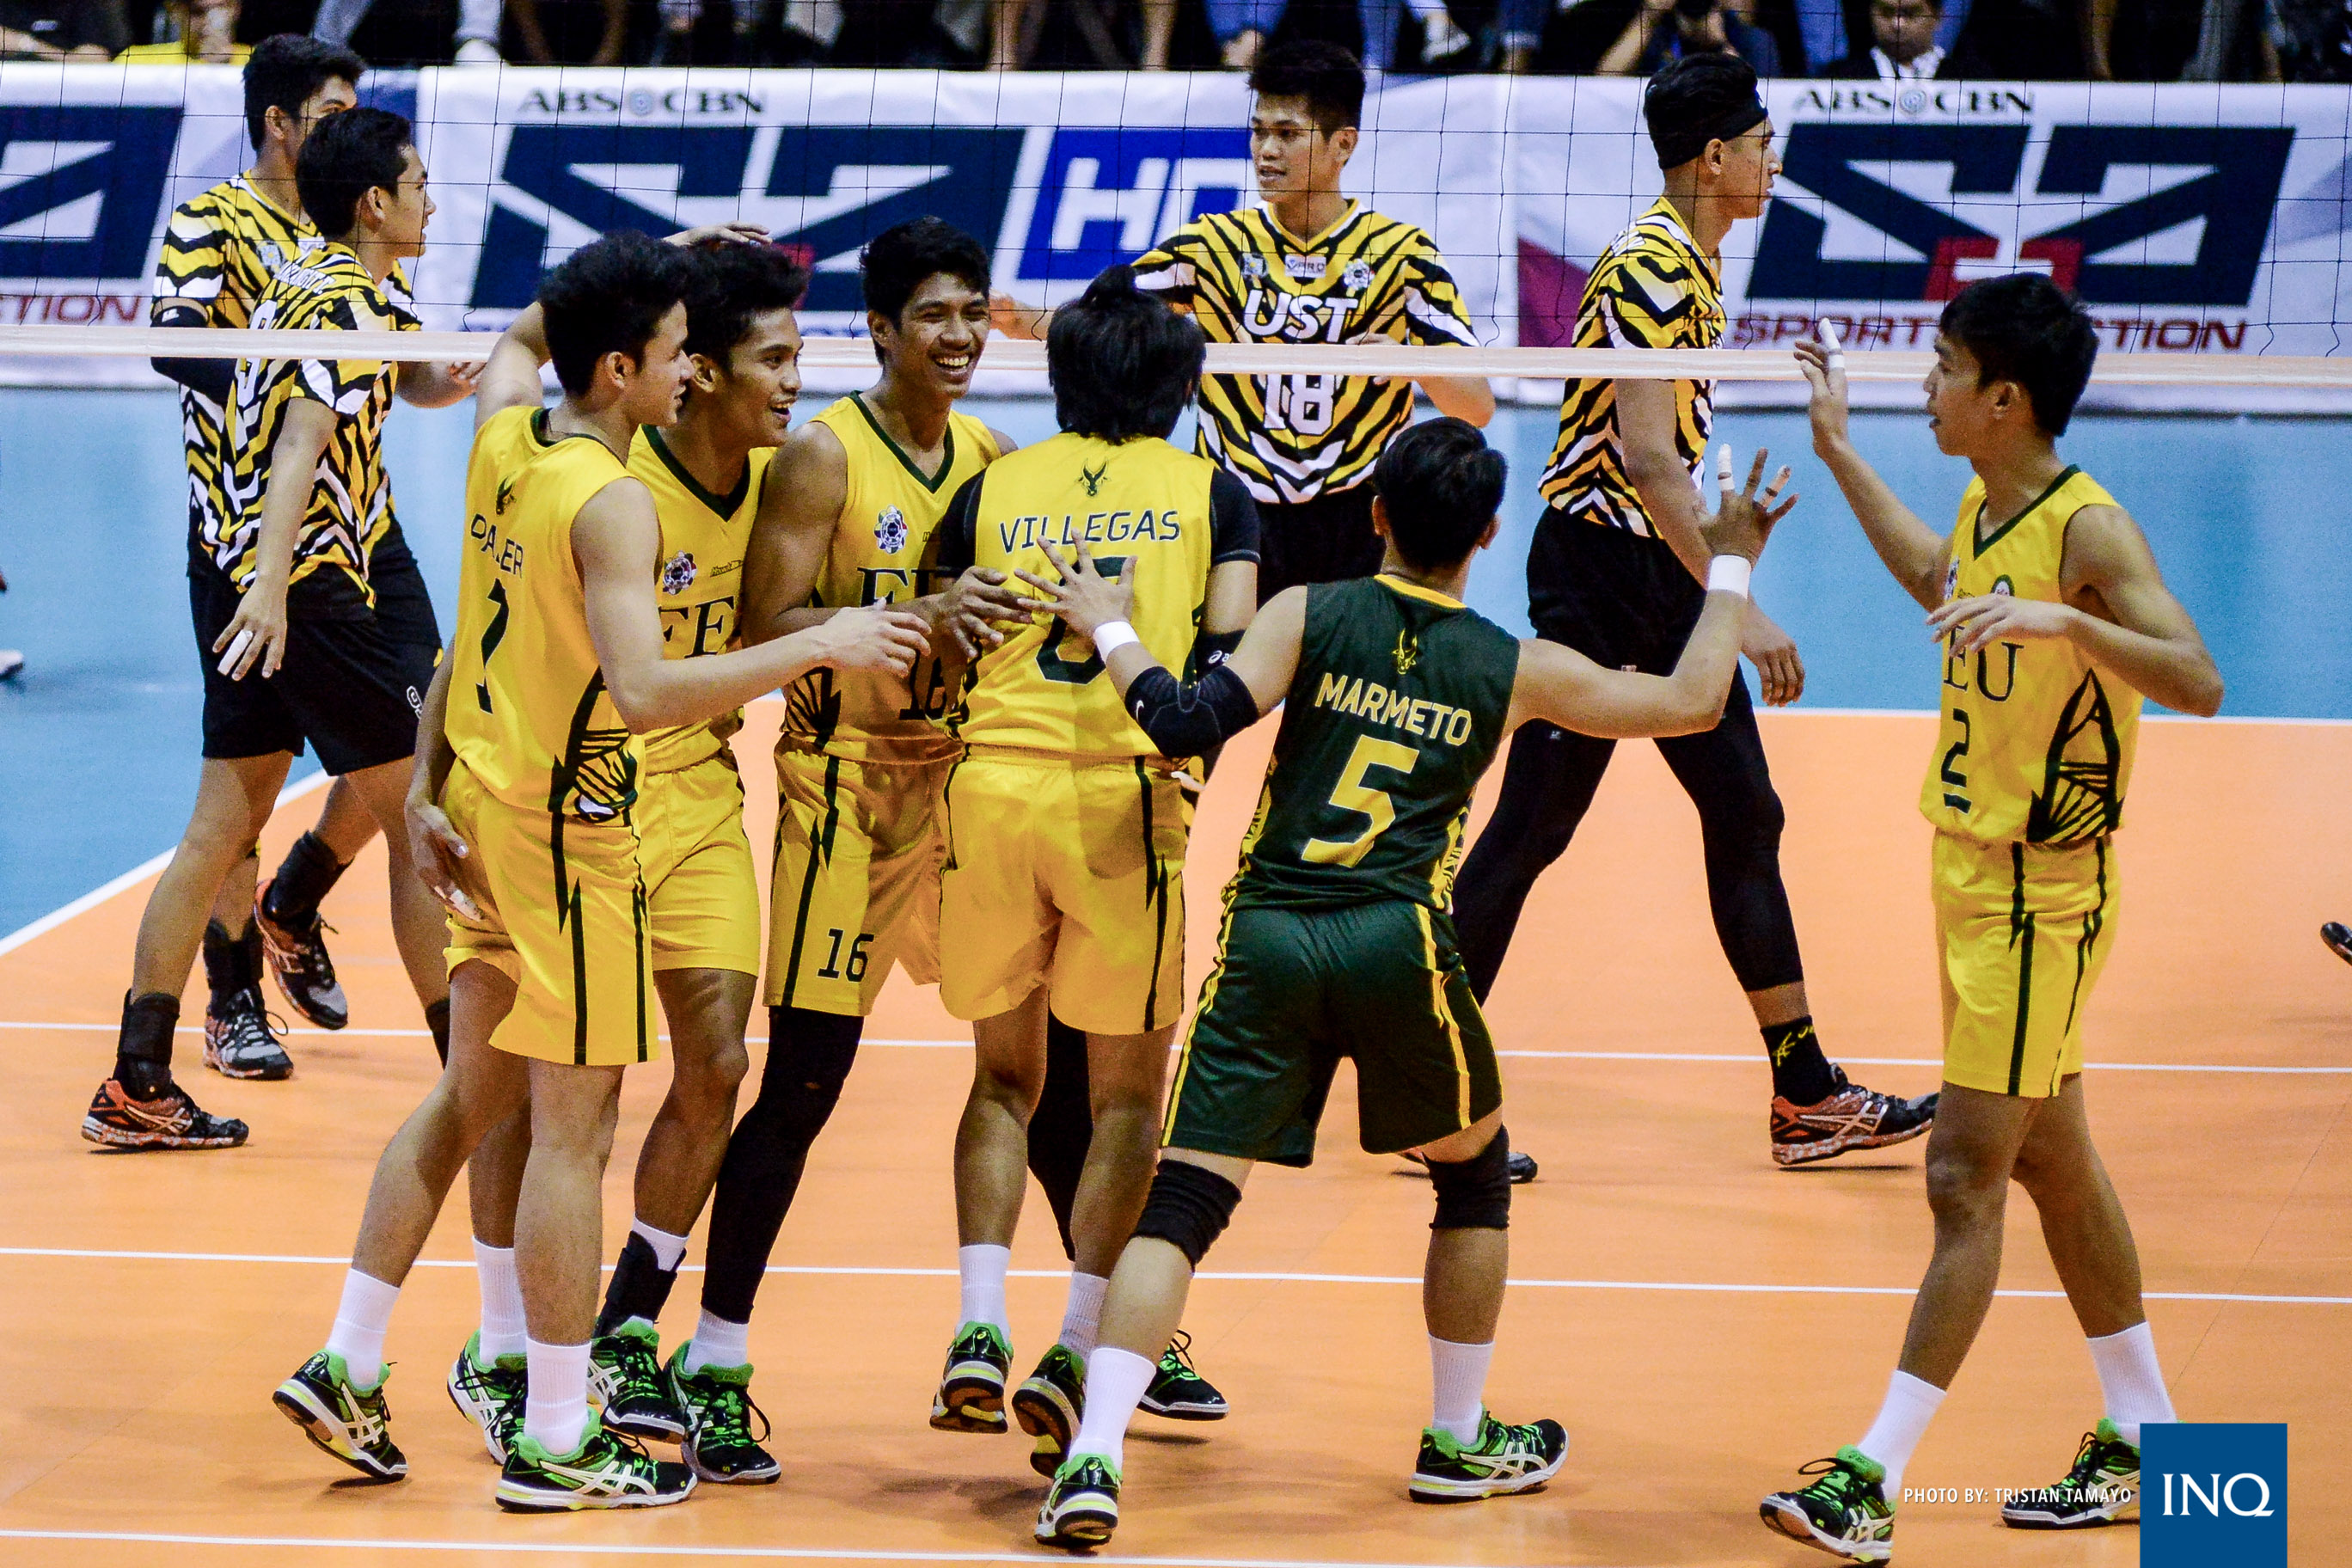 Mamon blames complacency after UST fails to advance in semis | Inquirer ...